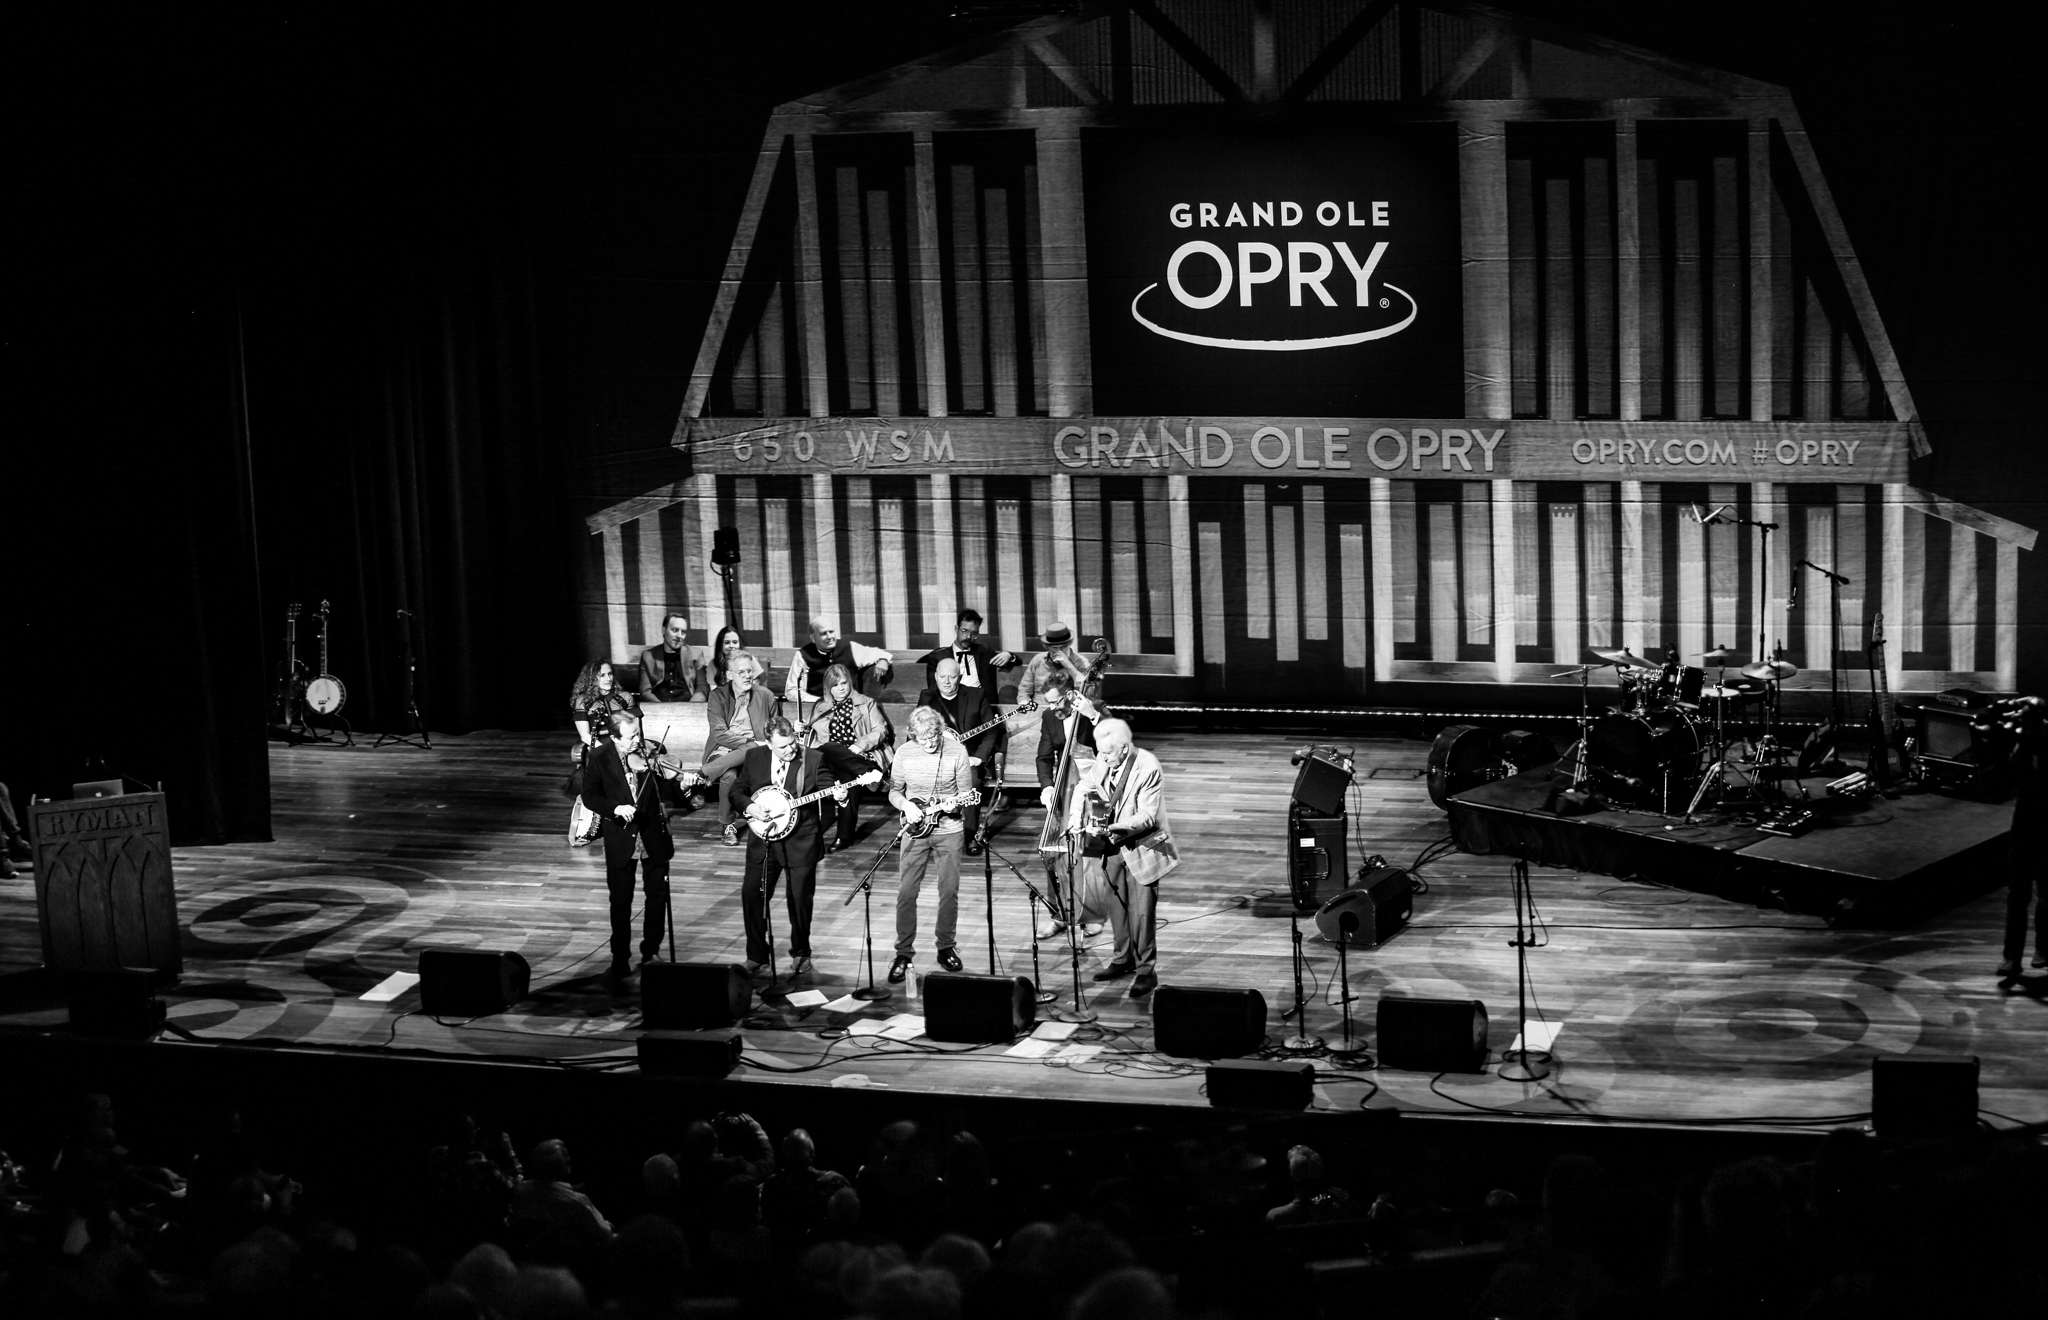 The Grand Ole Opry was once at the Ryman Auditorium. 